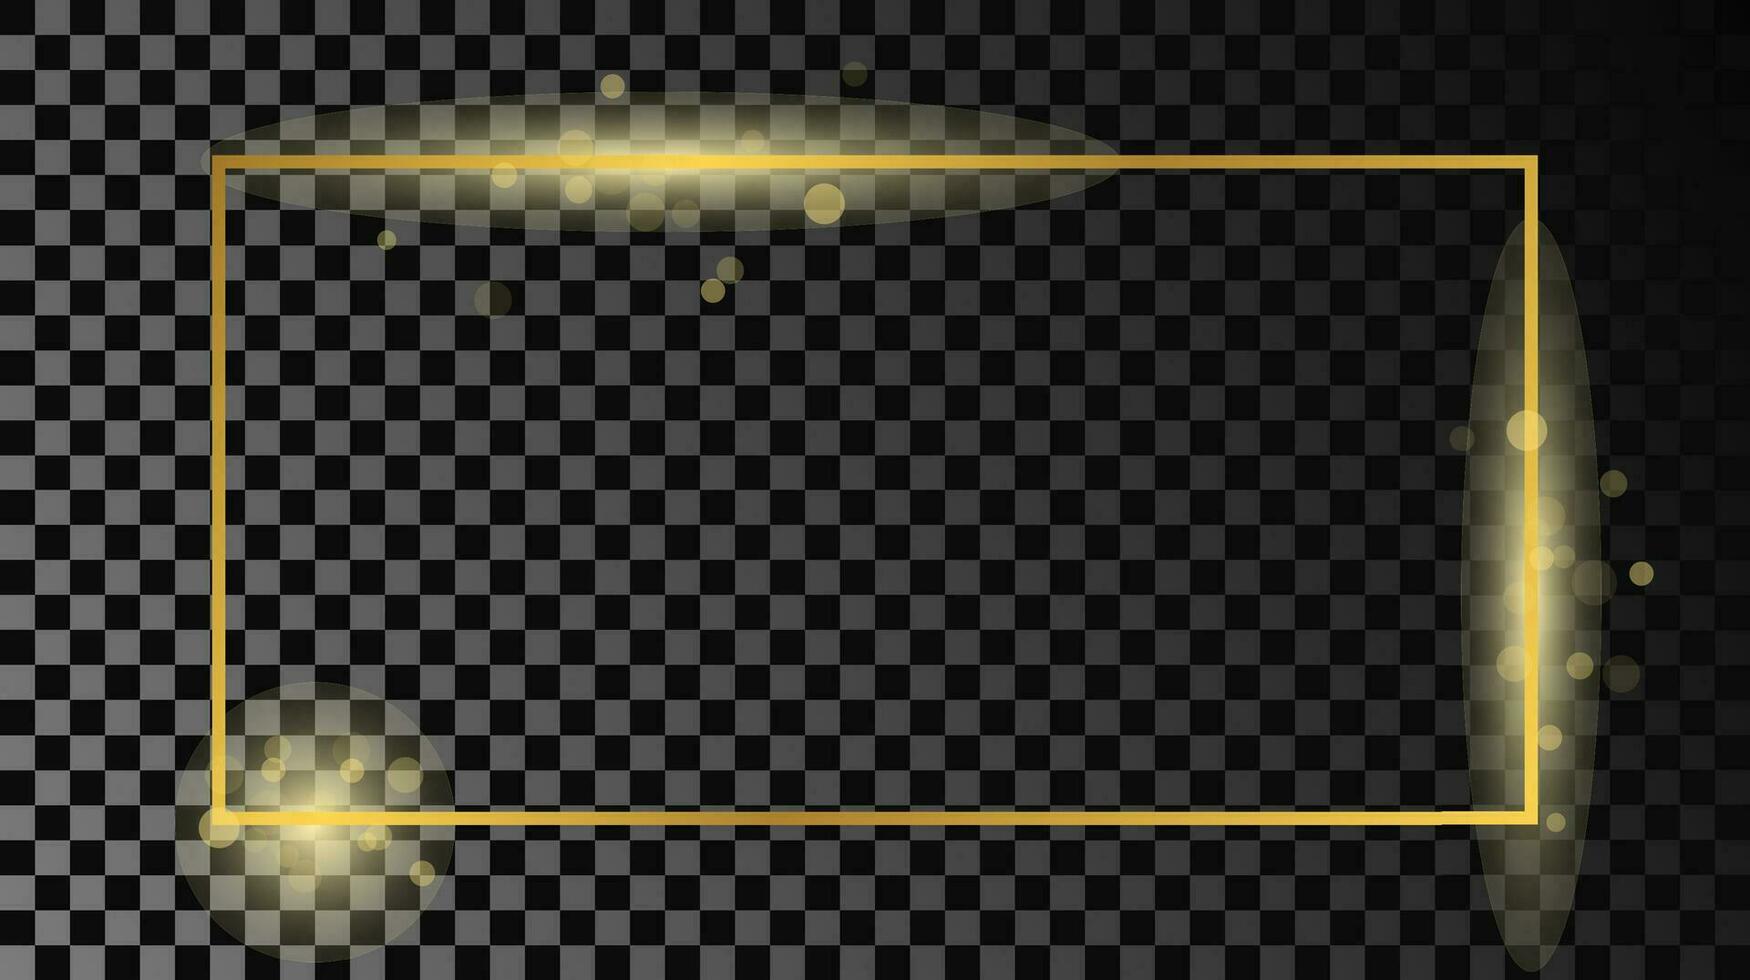 Gold glowing rectangular shape frame isolated on dark background. Shiny frame with glowing effects. Vector illustration.